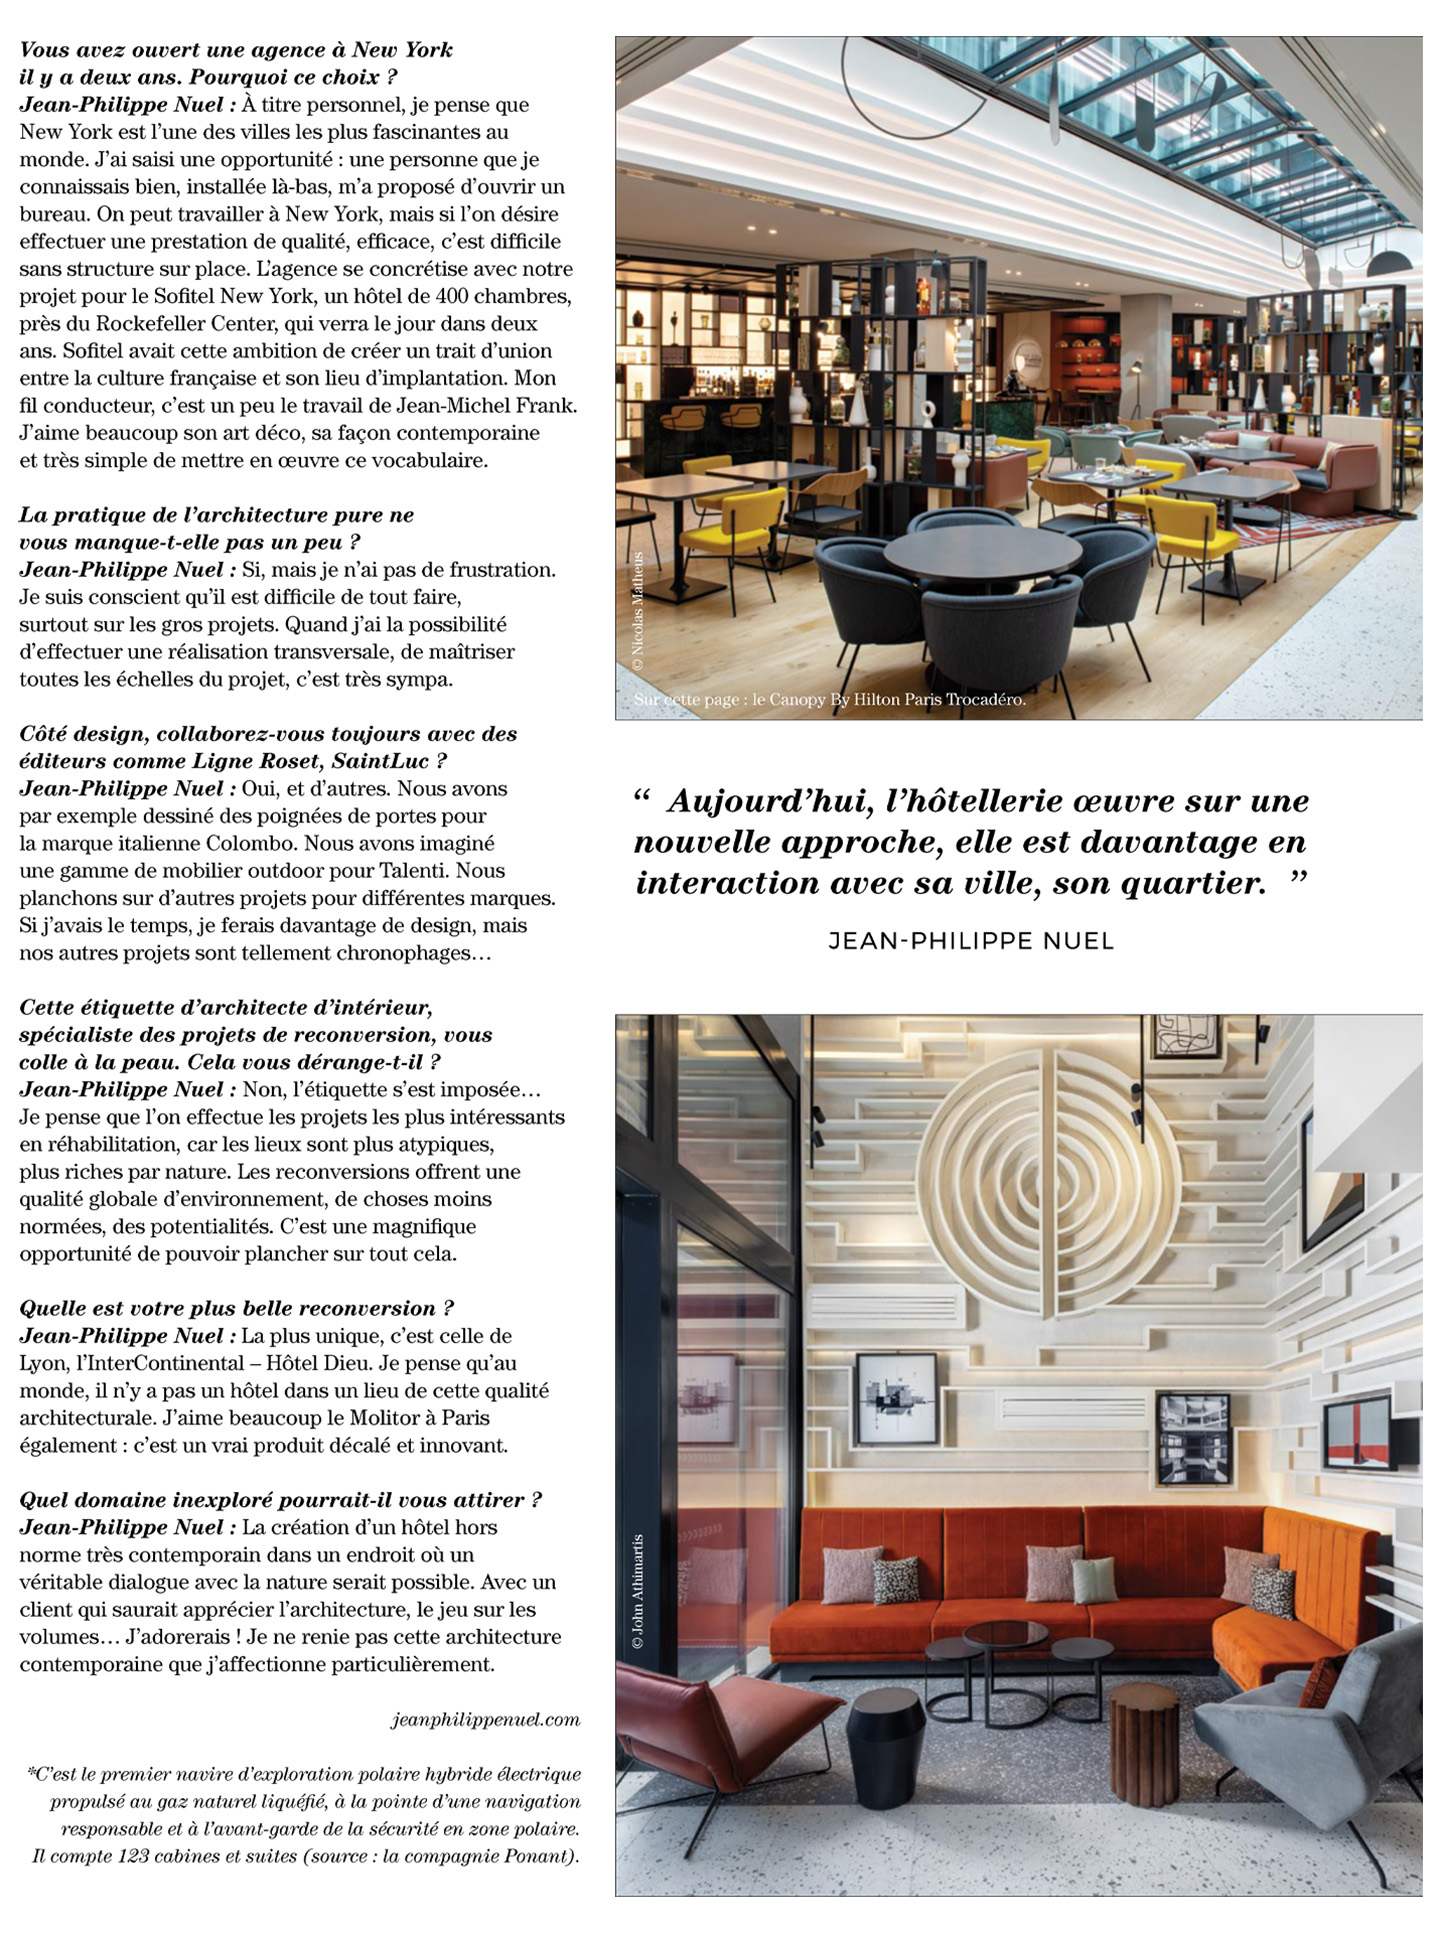 article on jean-philippe nuel and his interior design agency in artravel magazine